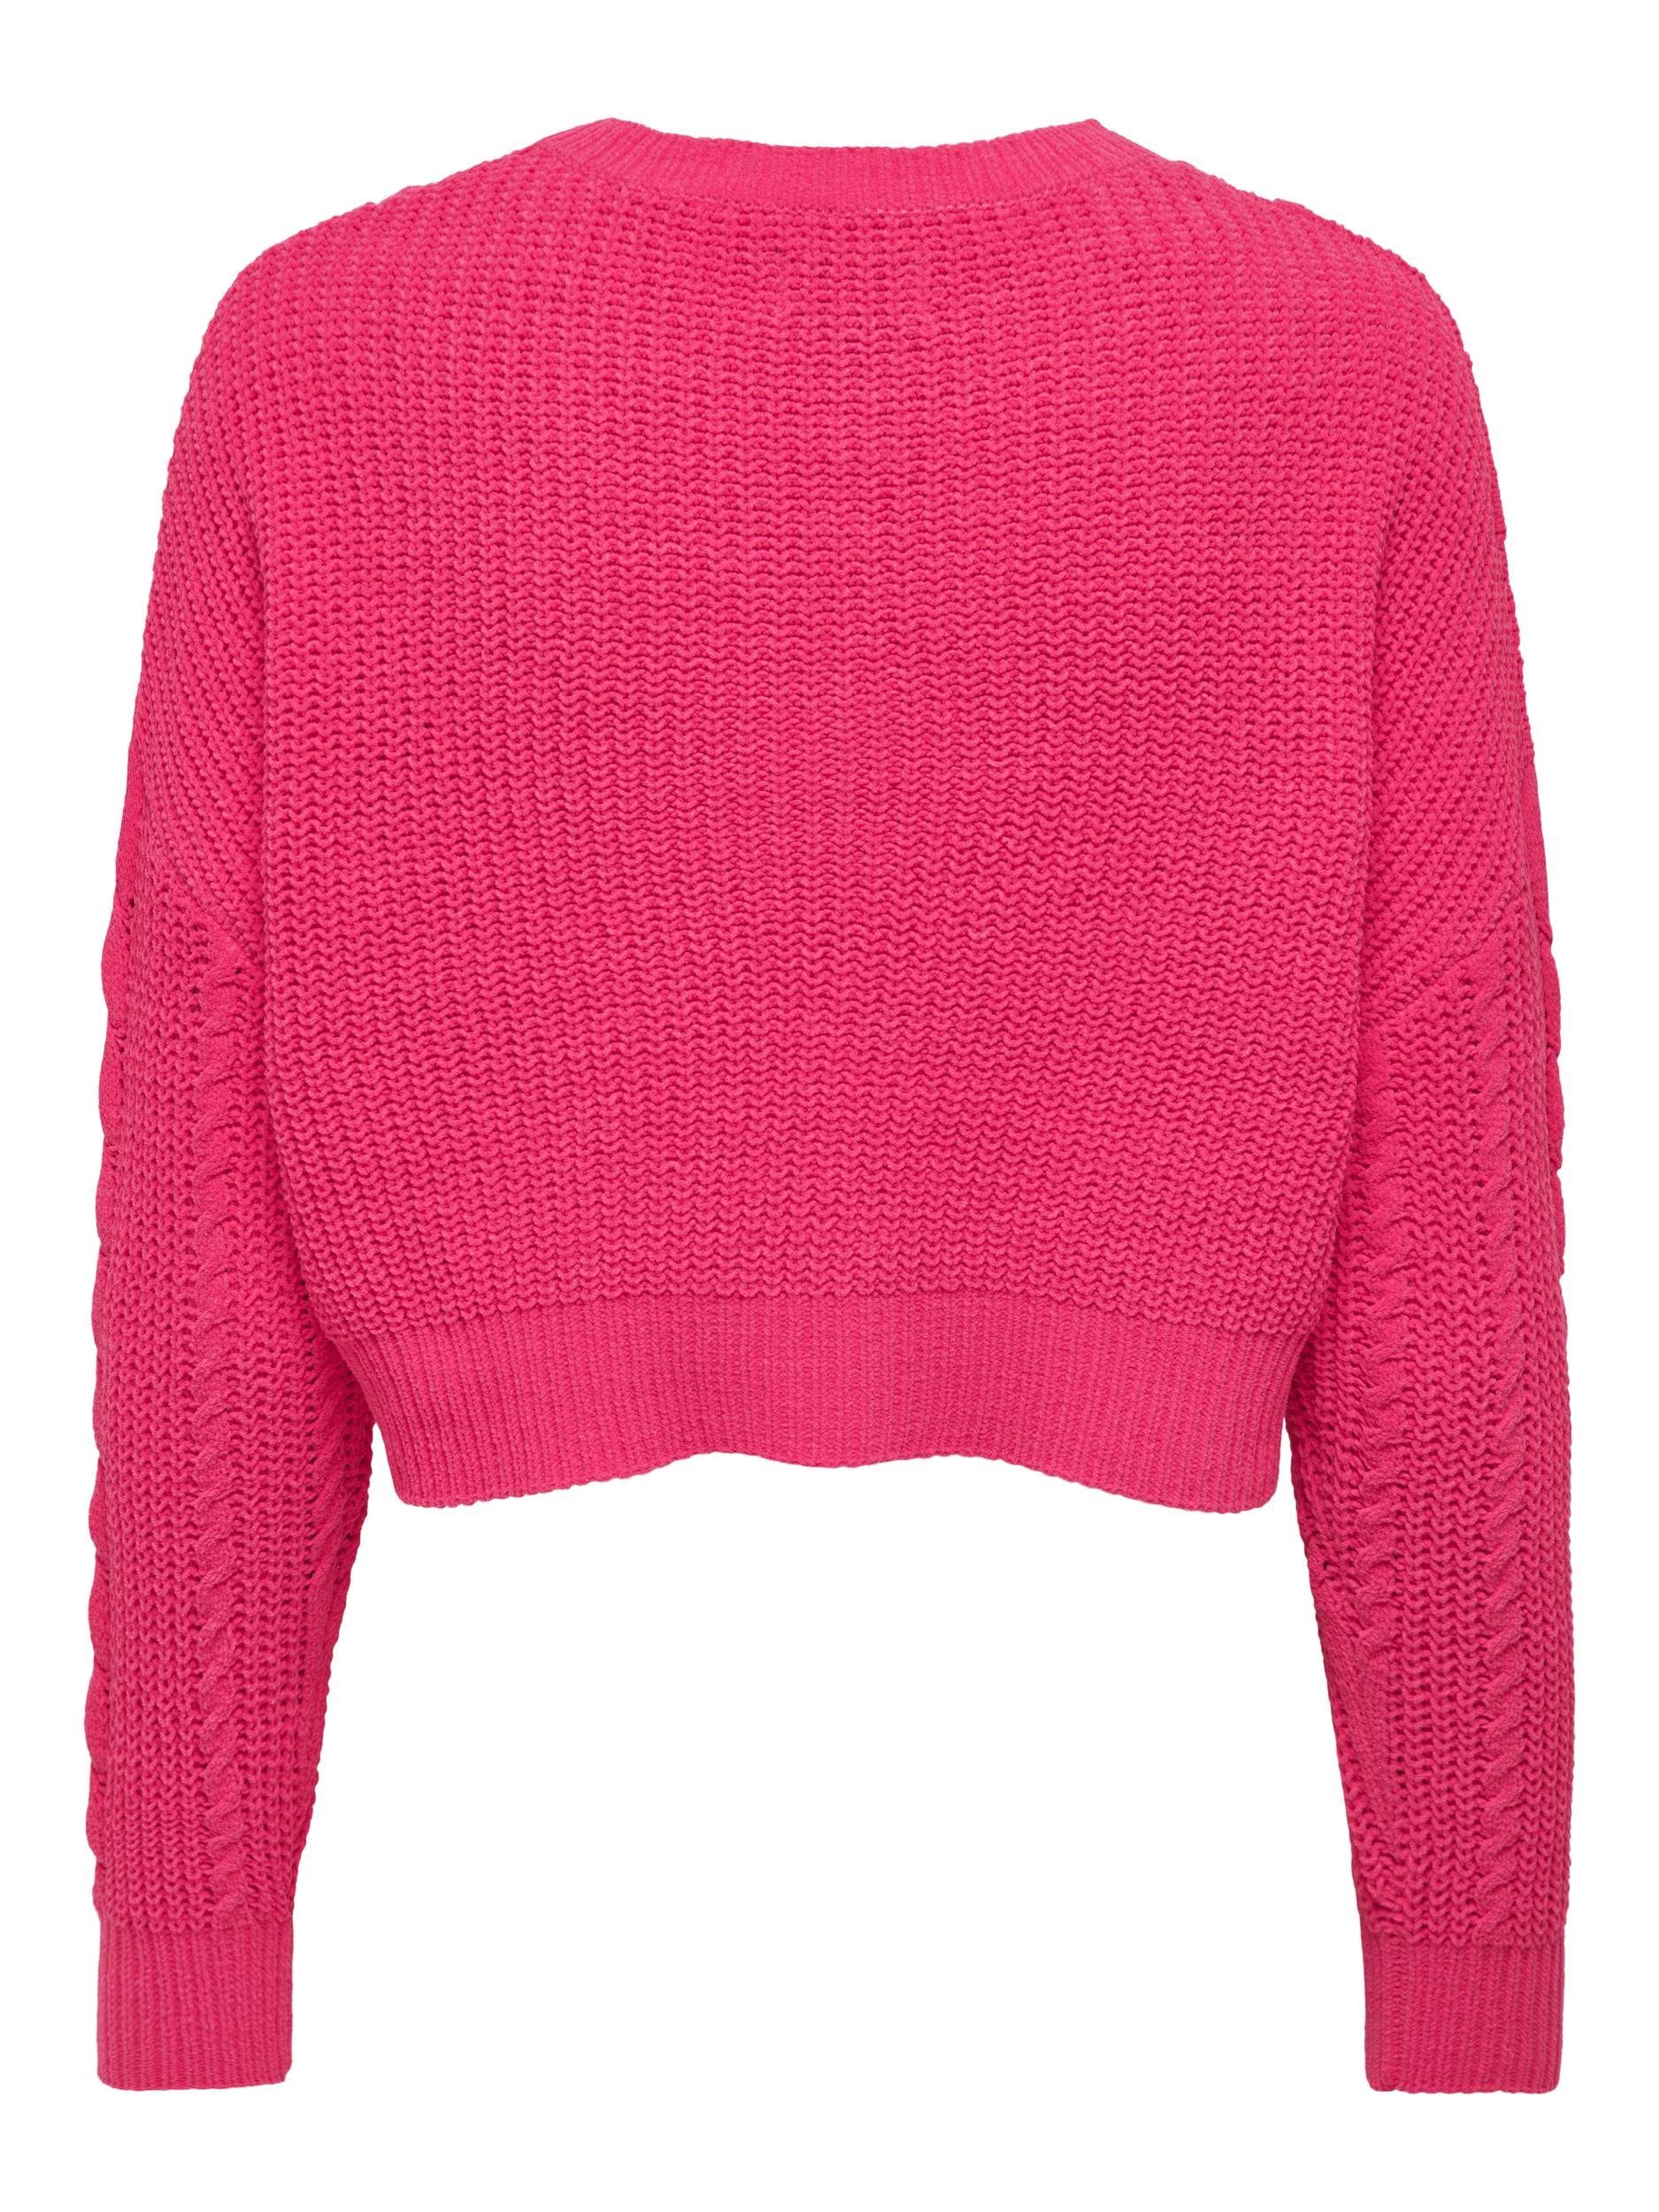 LIFE CROPPED O-NECK LS Strickpullover ONLY KN ONLMALENA